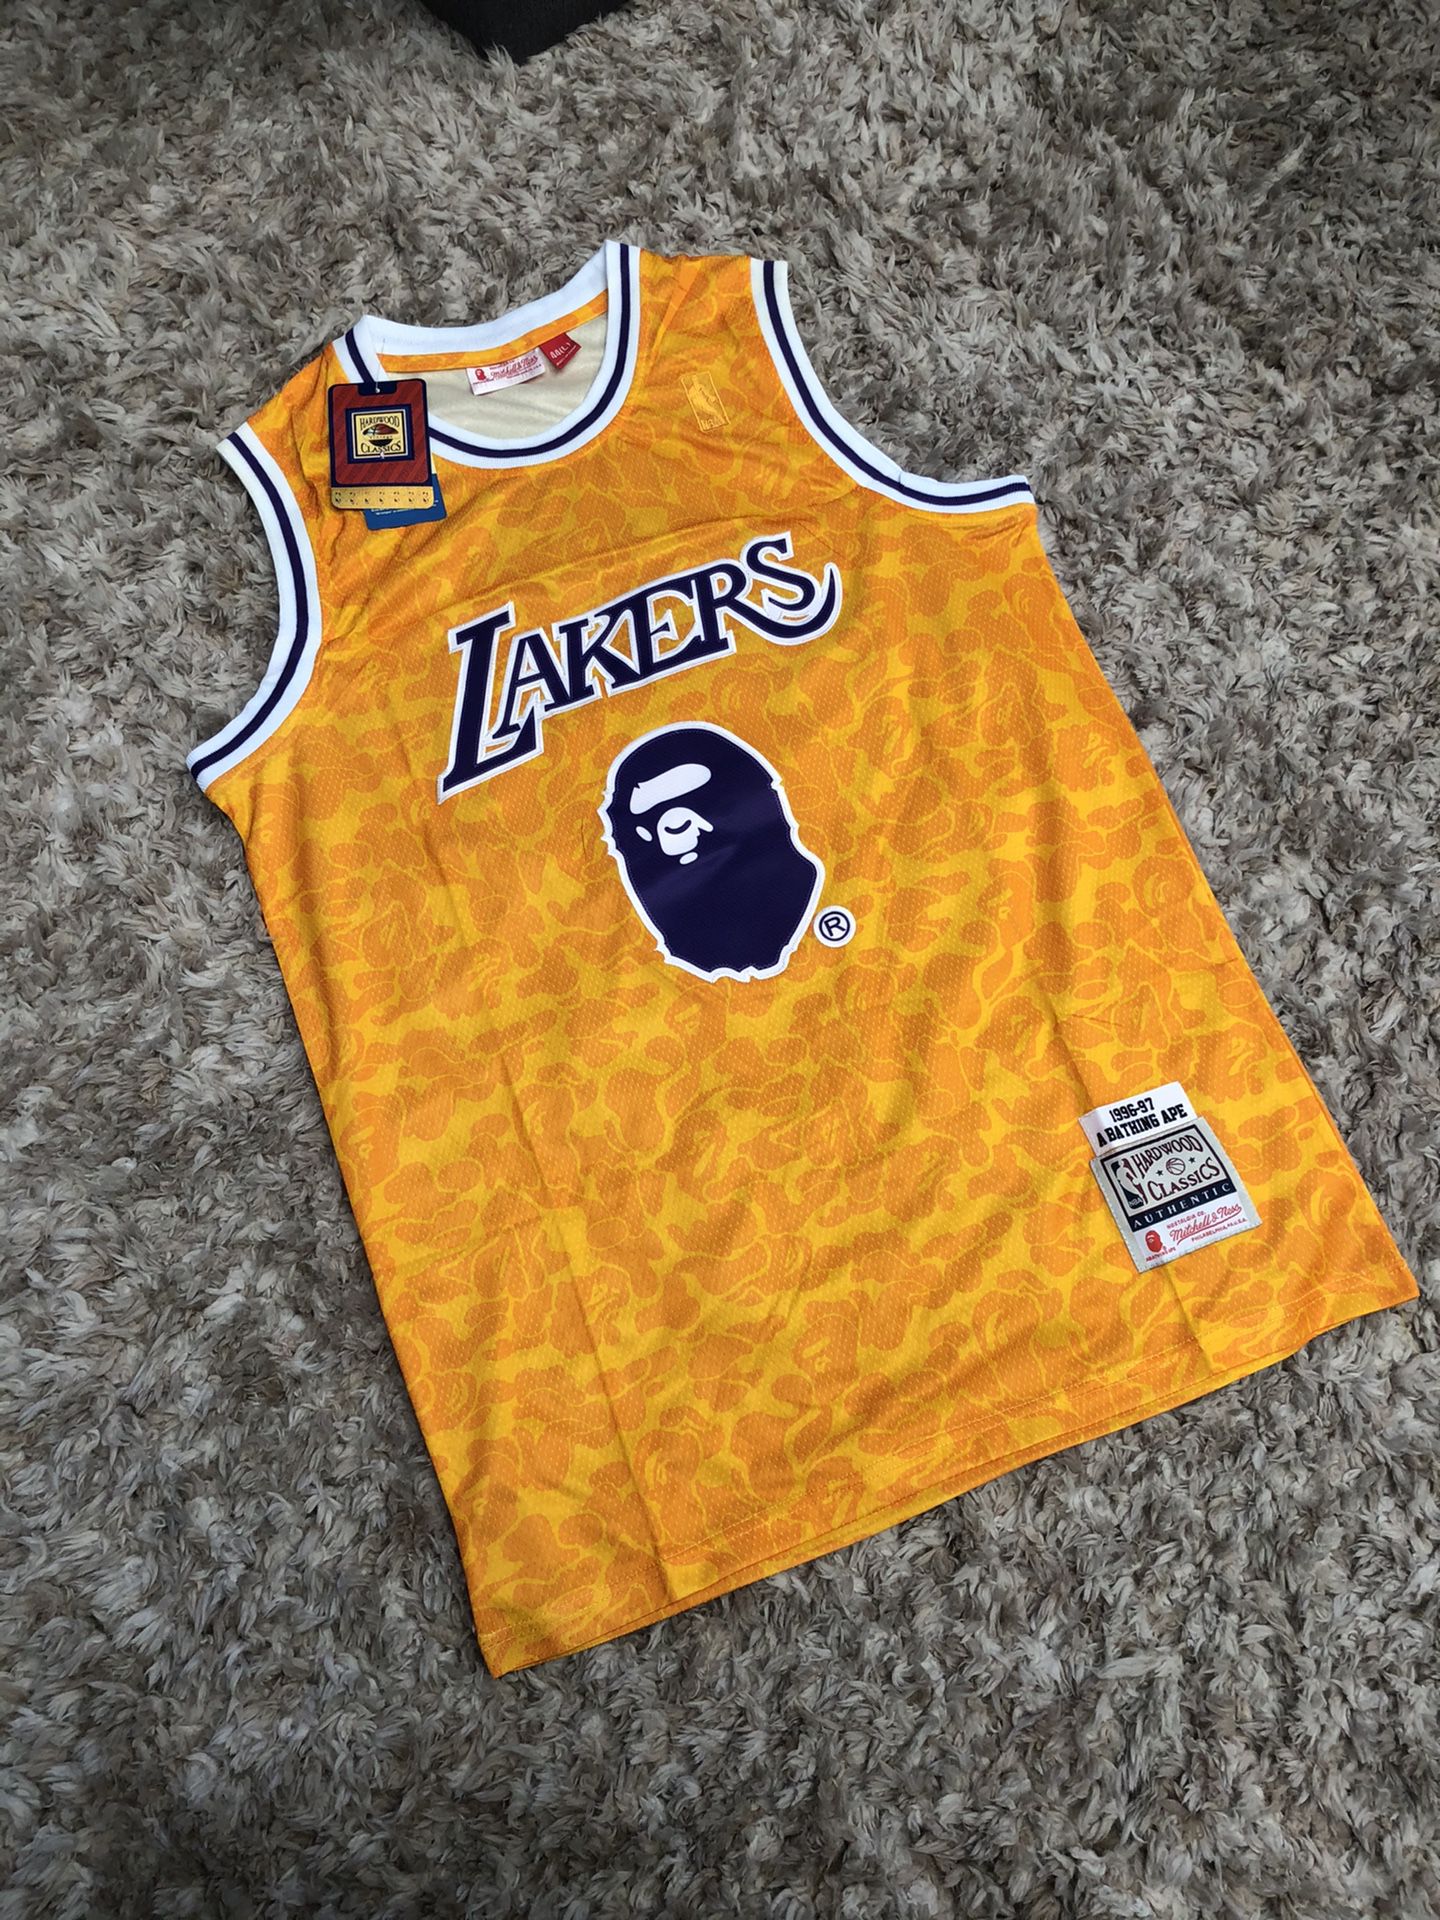 Laker Bape Basketball Jersey Size Medium for Sale in San Leandro, CA -  OfferUp